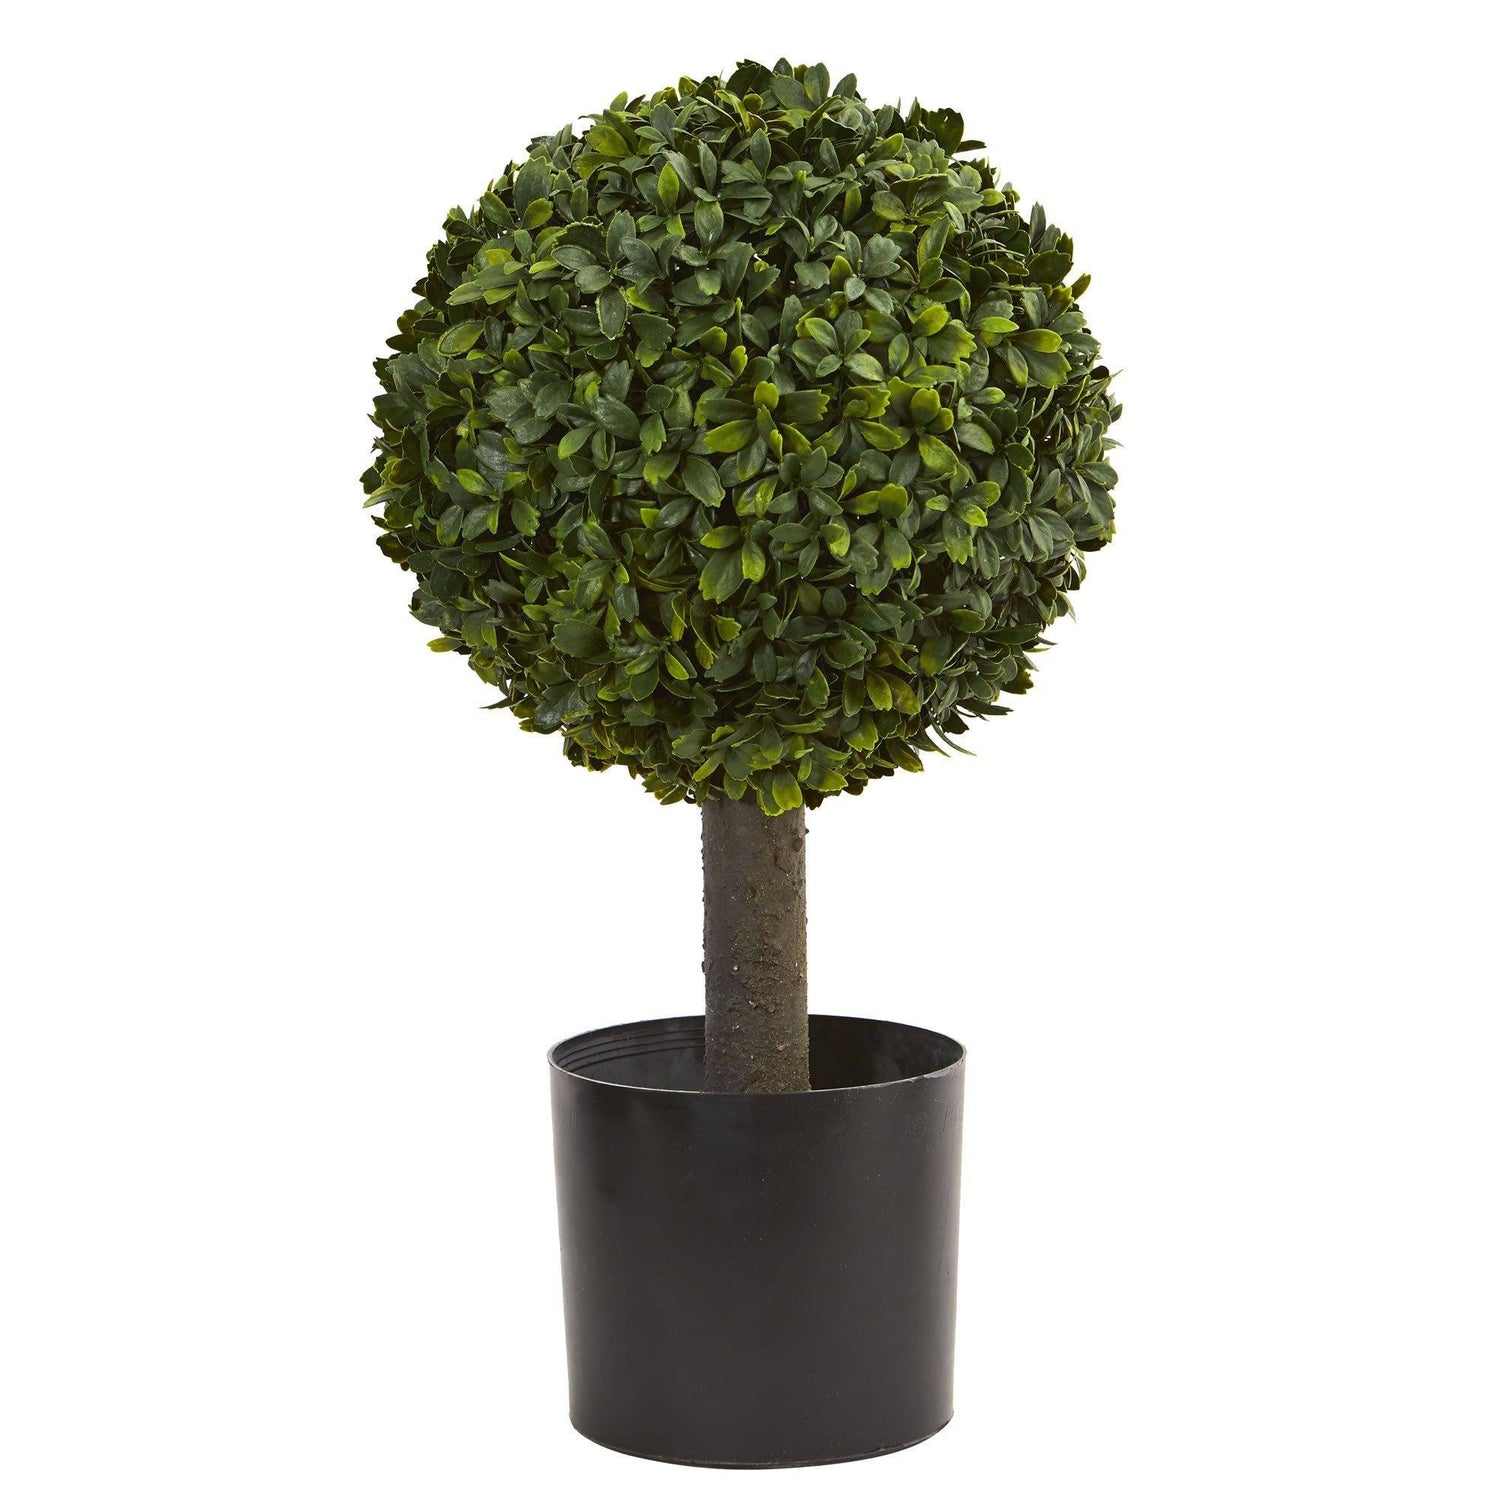 21” Boxwood Ball Topiary Artificial Tree